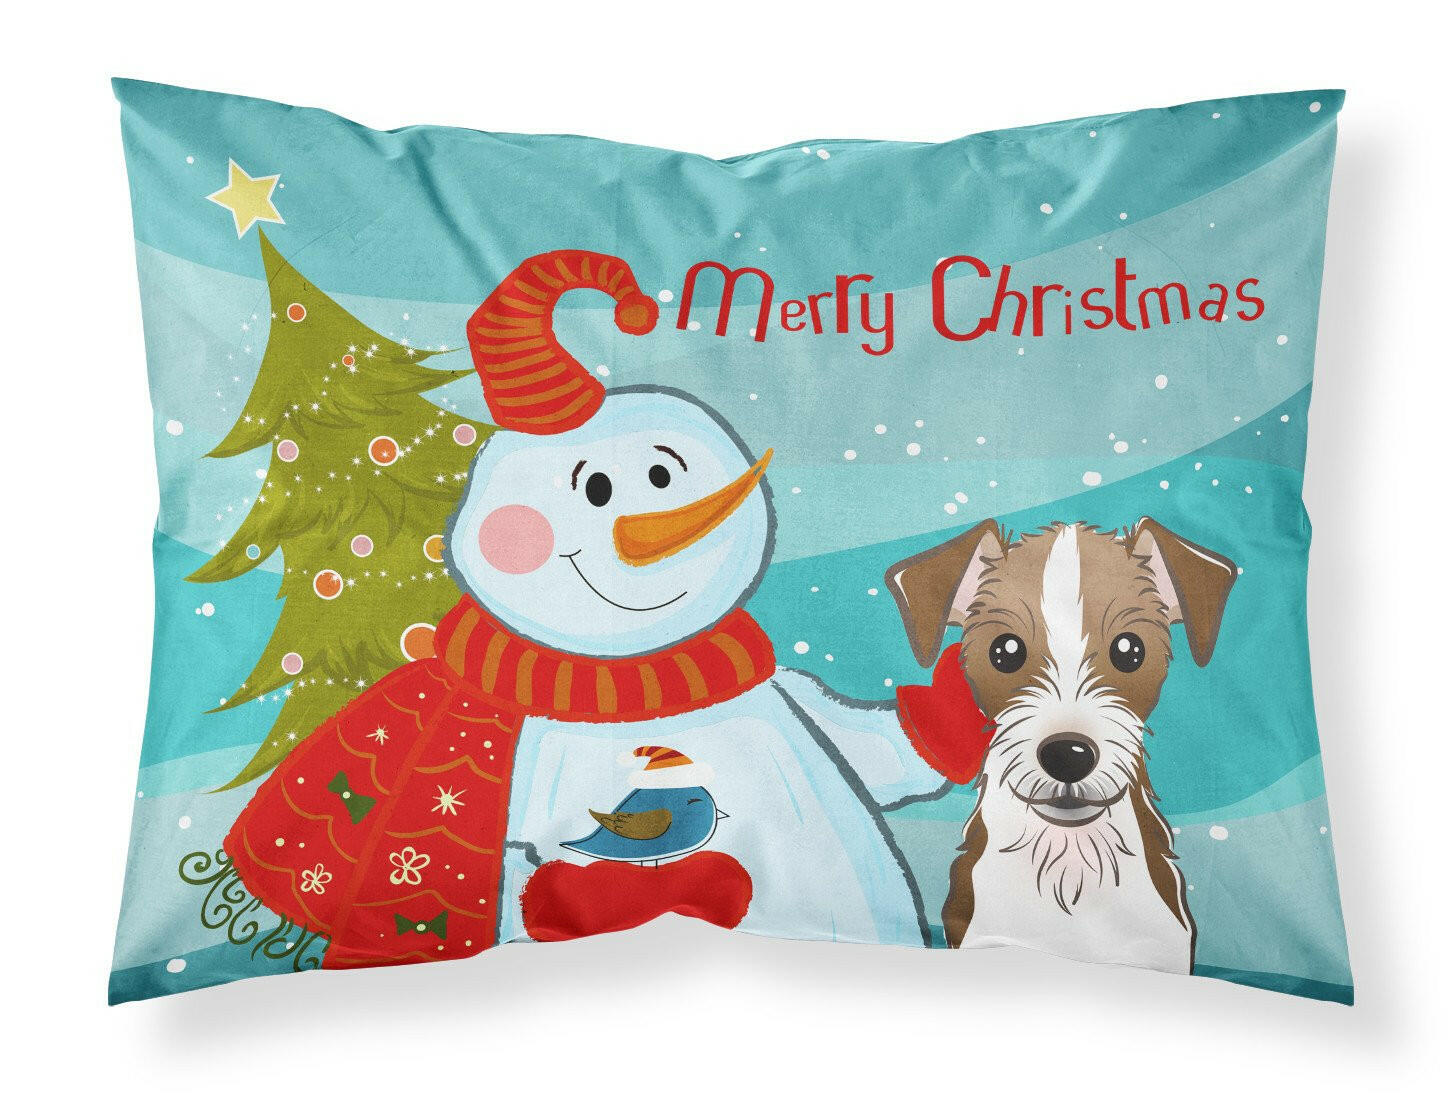 Snowman with Jack Russell Terrier Fabric Standard Pillowcase BB1822PILLOWCASE by Caroline's Treasures